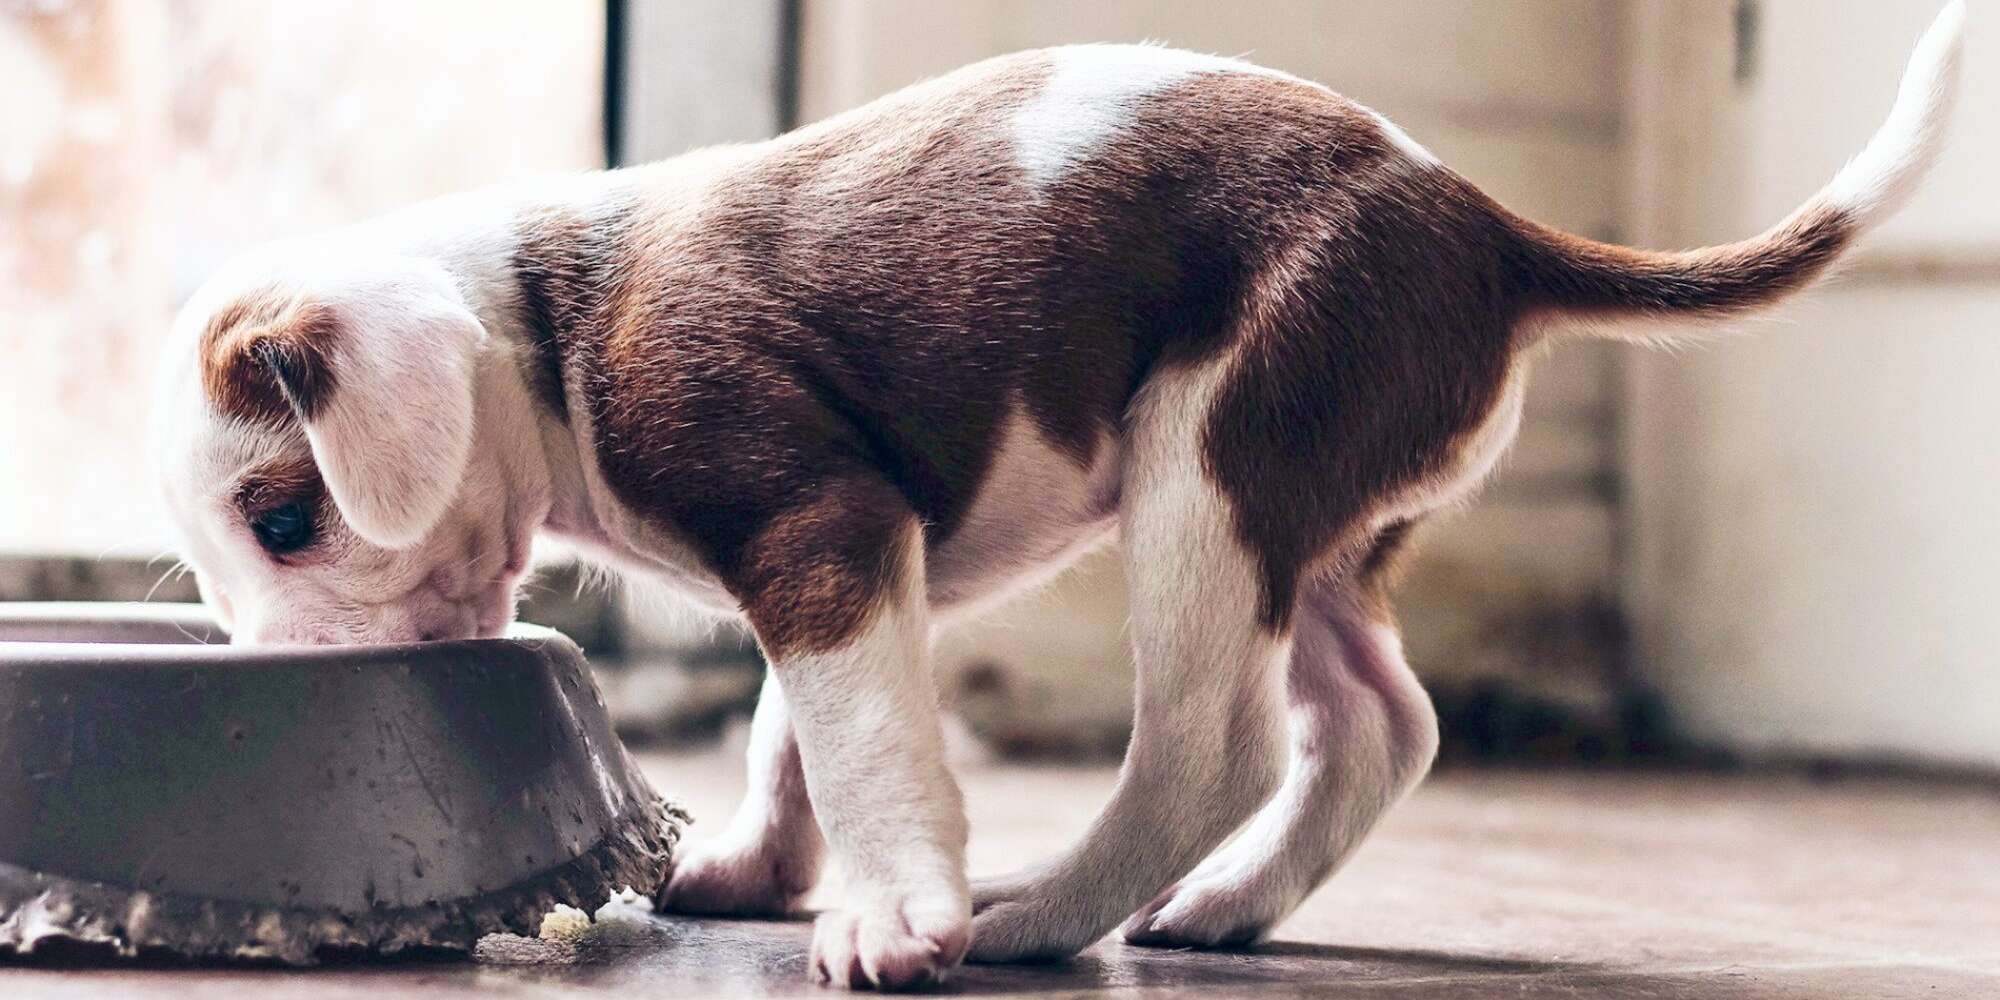 What You Need to Know About Feeding Your New Puppy